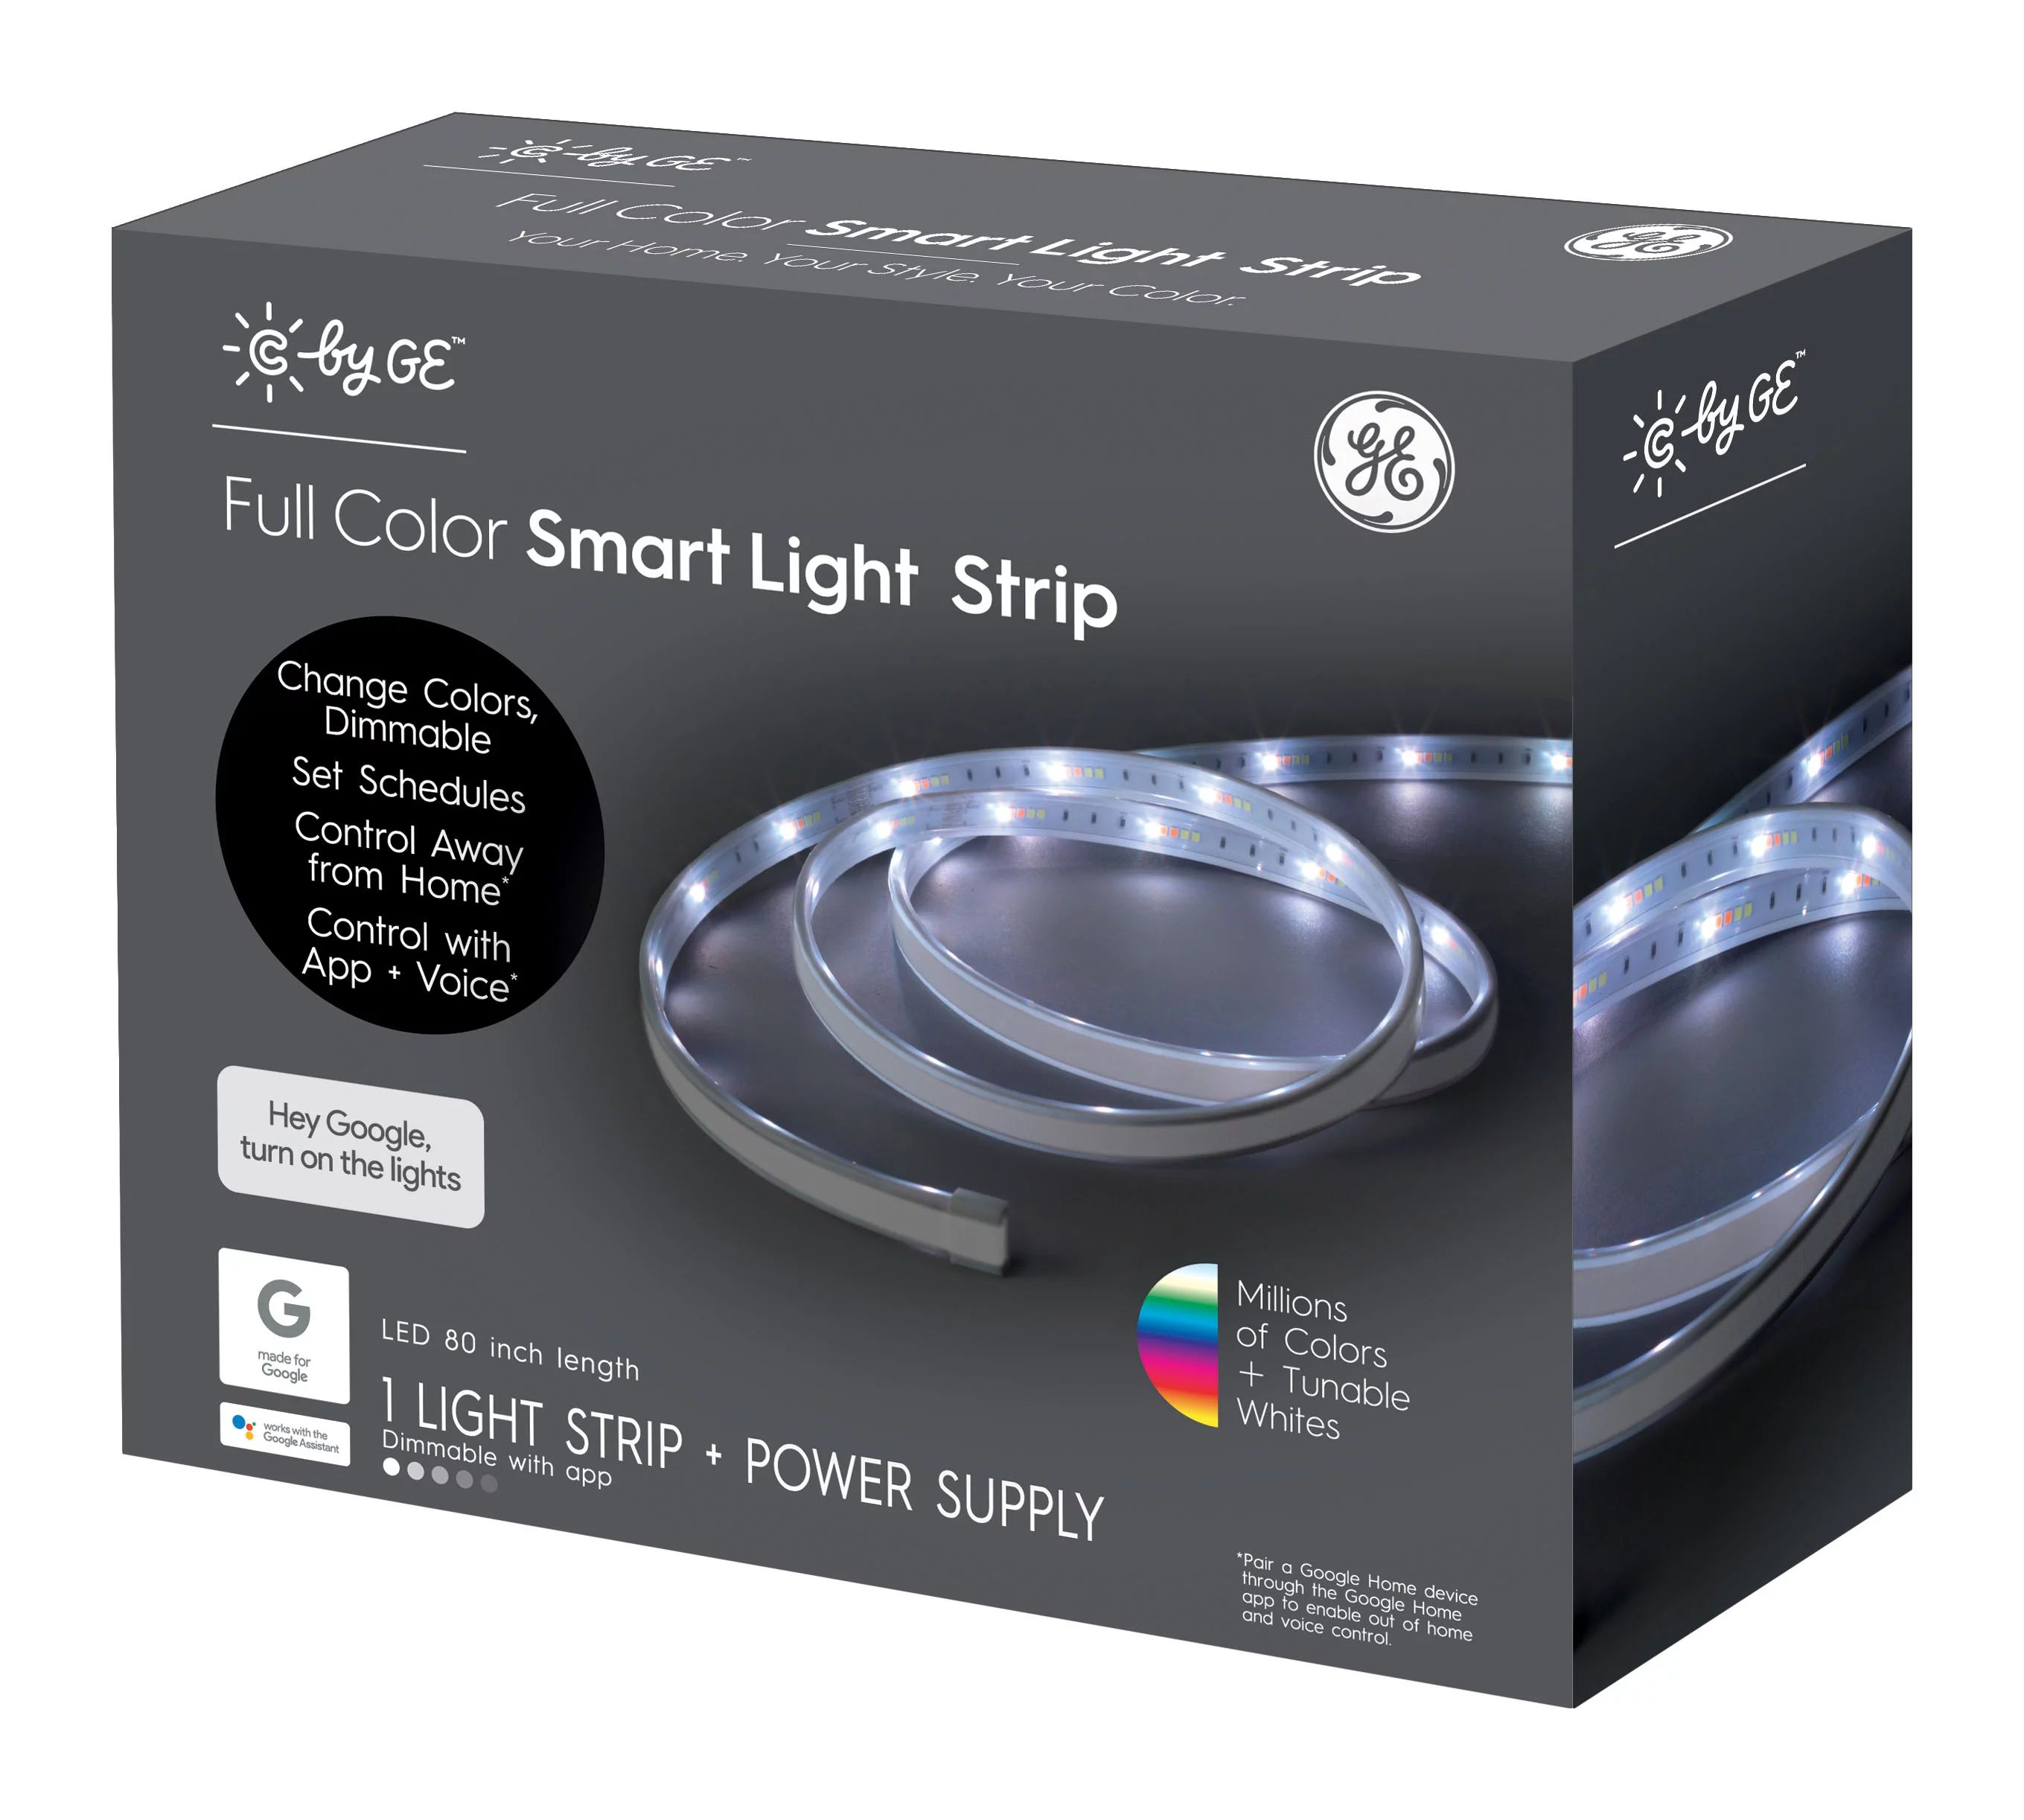 GE C by GE Full Color LED Light Strip (80-inch Light Strip + Power Supply), Bluetooth Enabled, Wo... | Walmart (US)